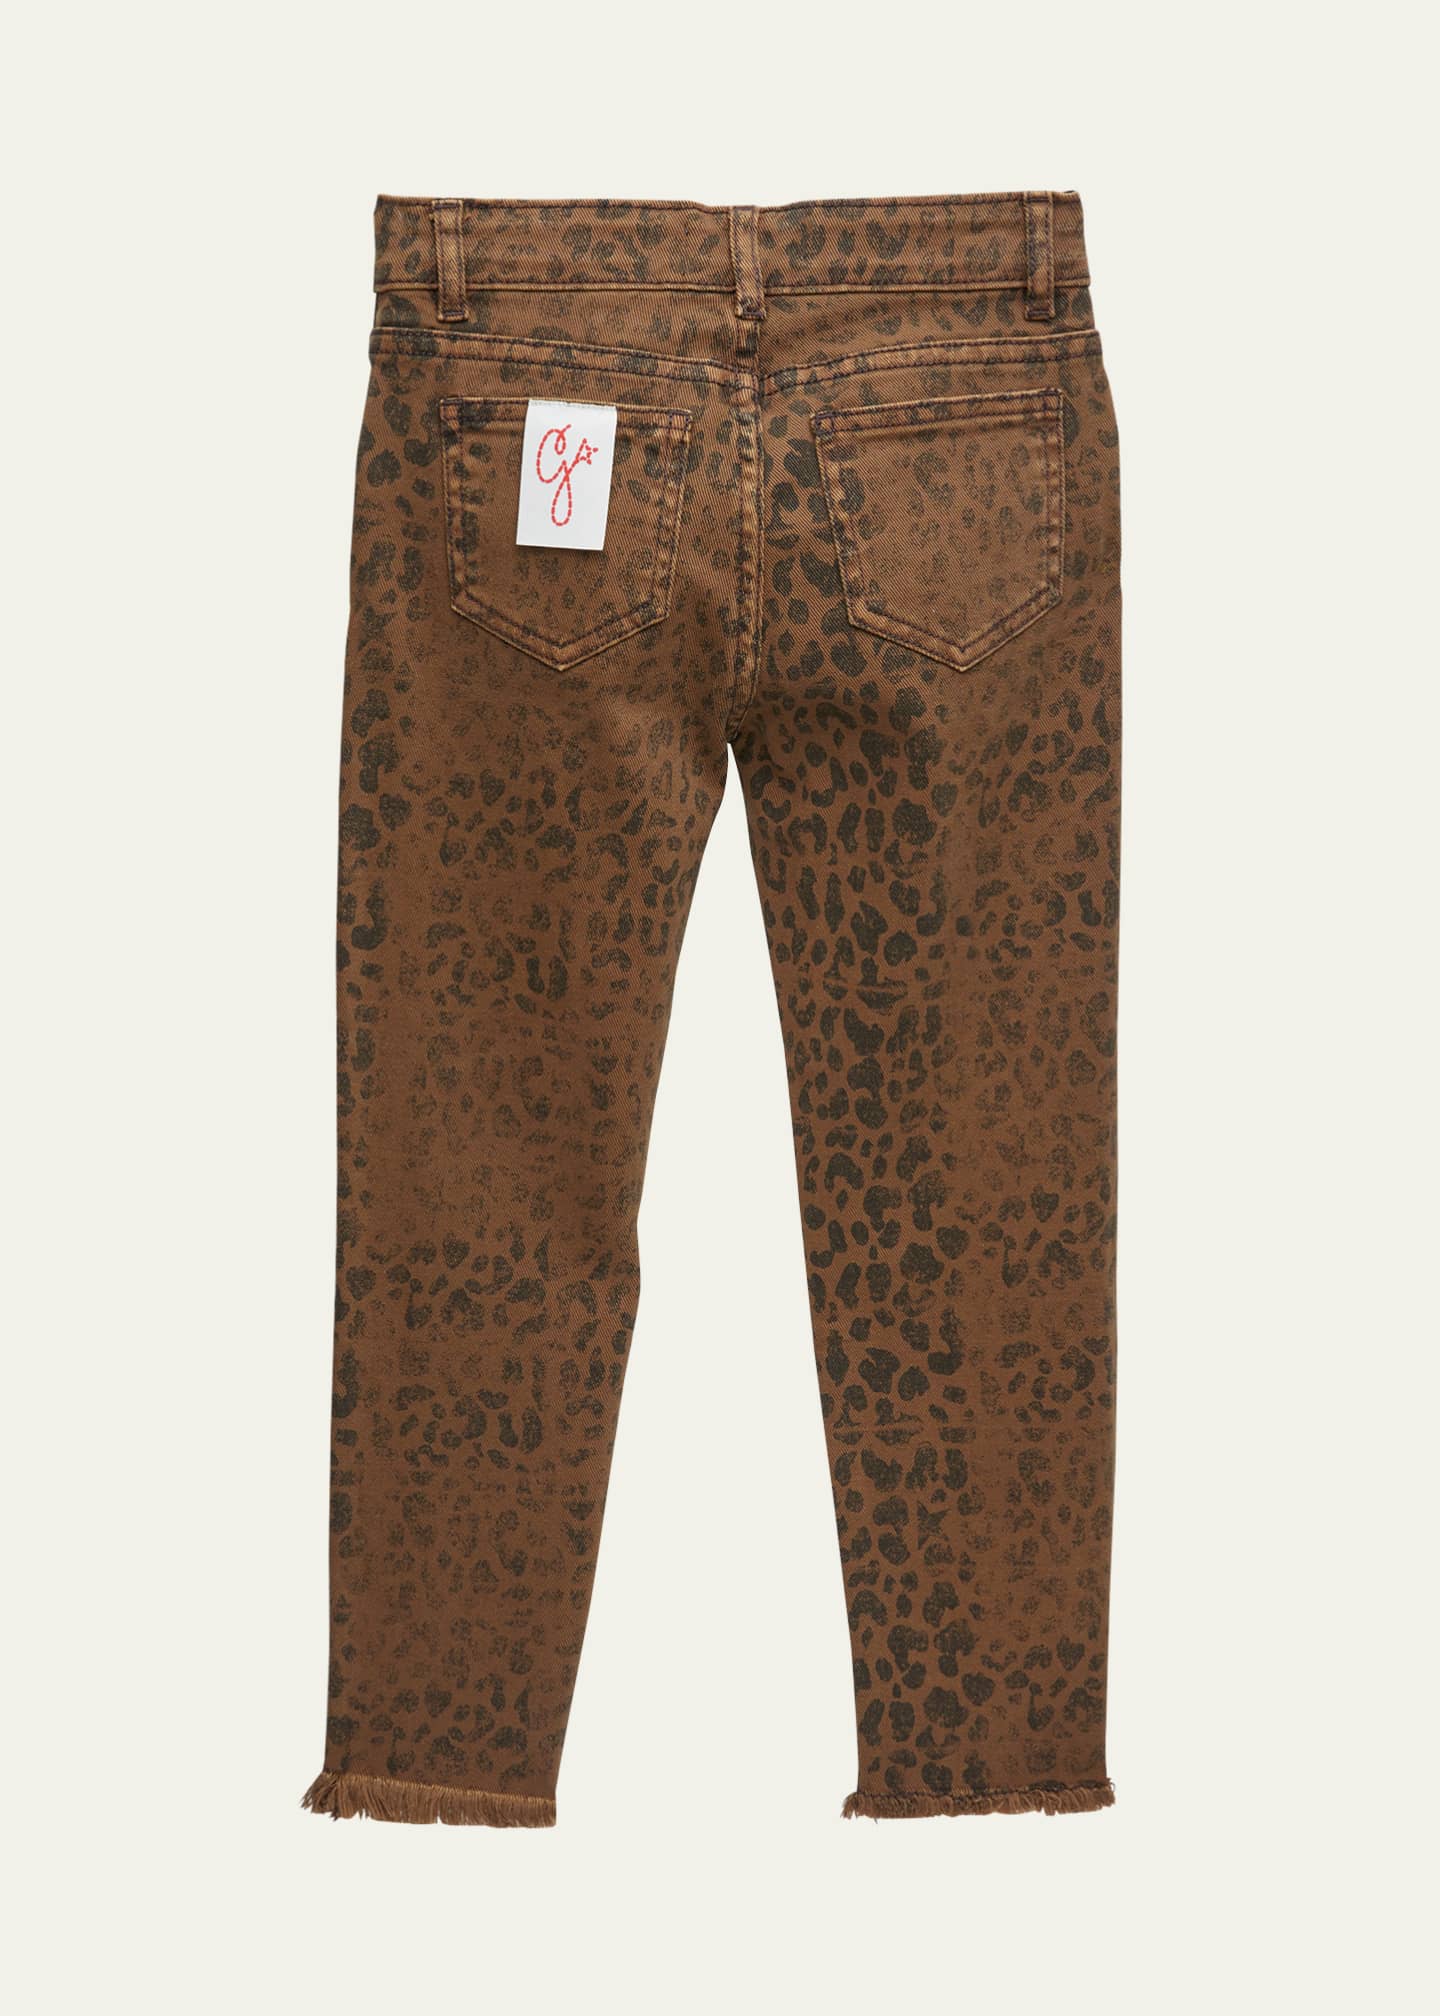 Golden Goose Girl's Faded Leopard-Print Jeans, Size 4-10